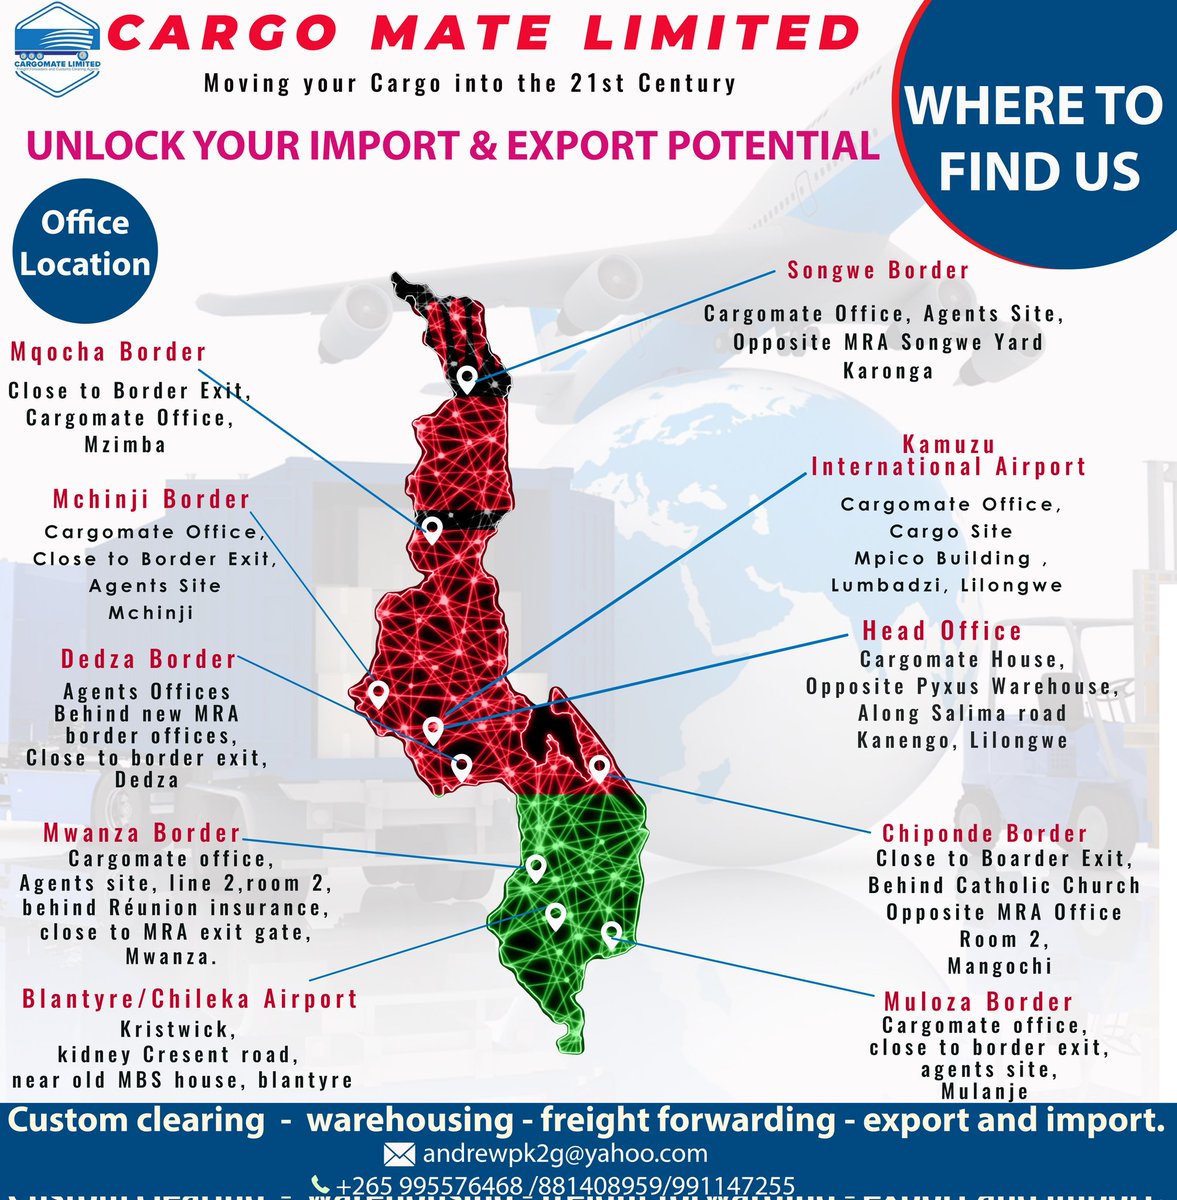 Take some time to visit us!

#ourlocation #customsclearance, #cargohandling, #OnTimeDelivery